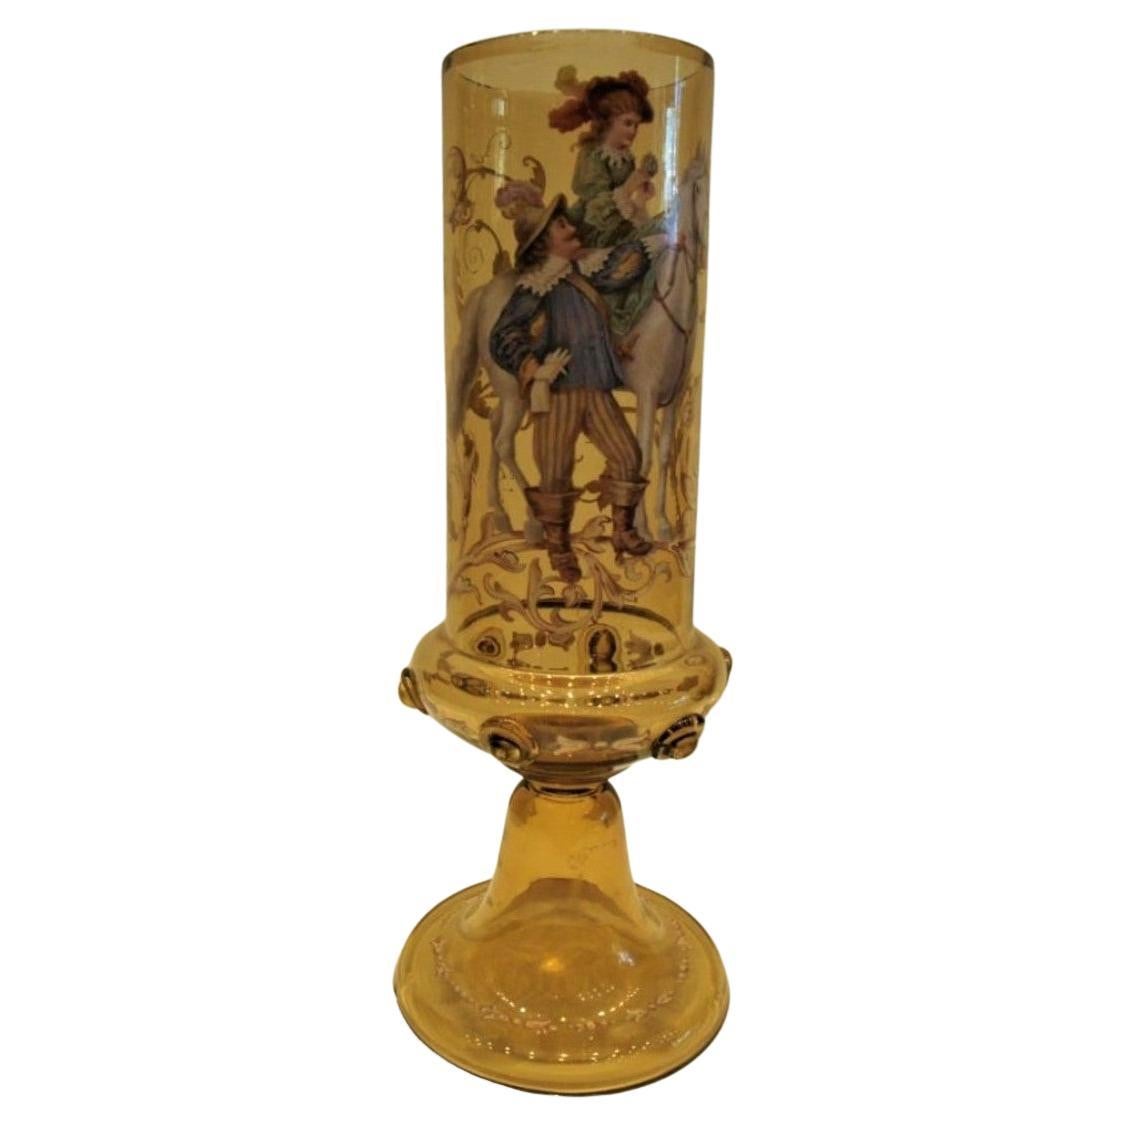 Rare Important Antique European Painted Amber Vase Portrait of a Woman on Horse For Sale